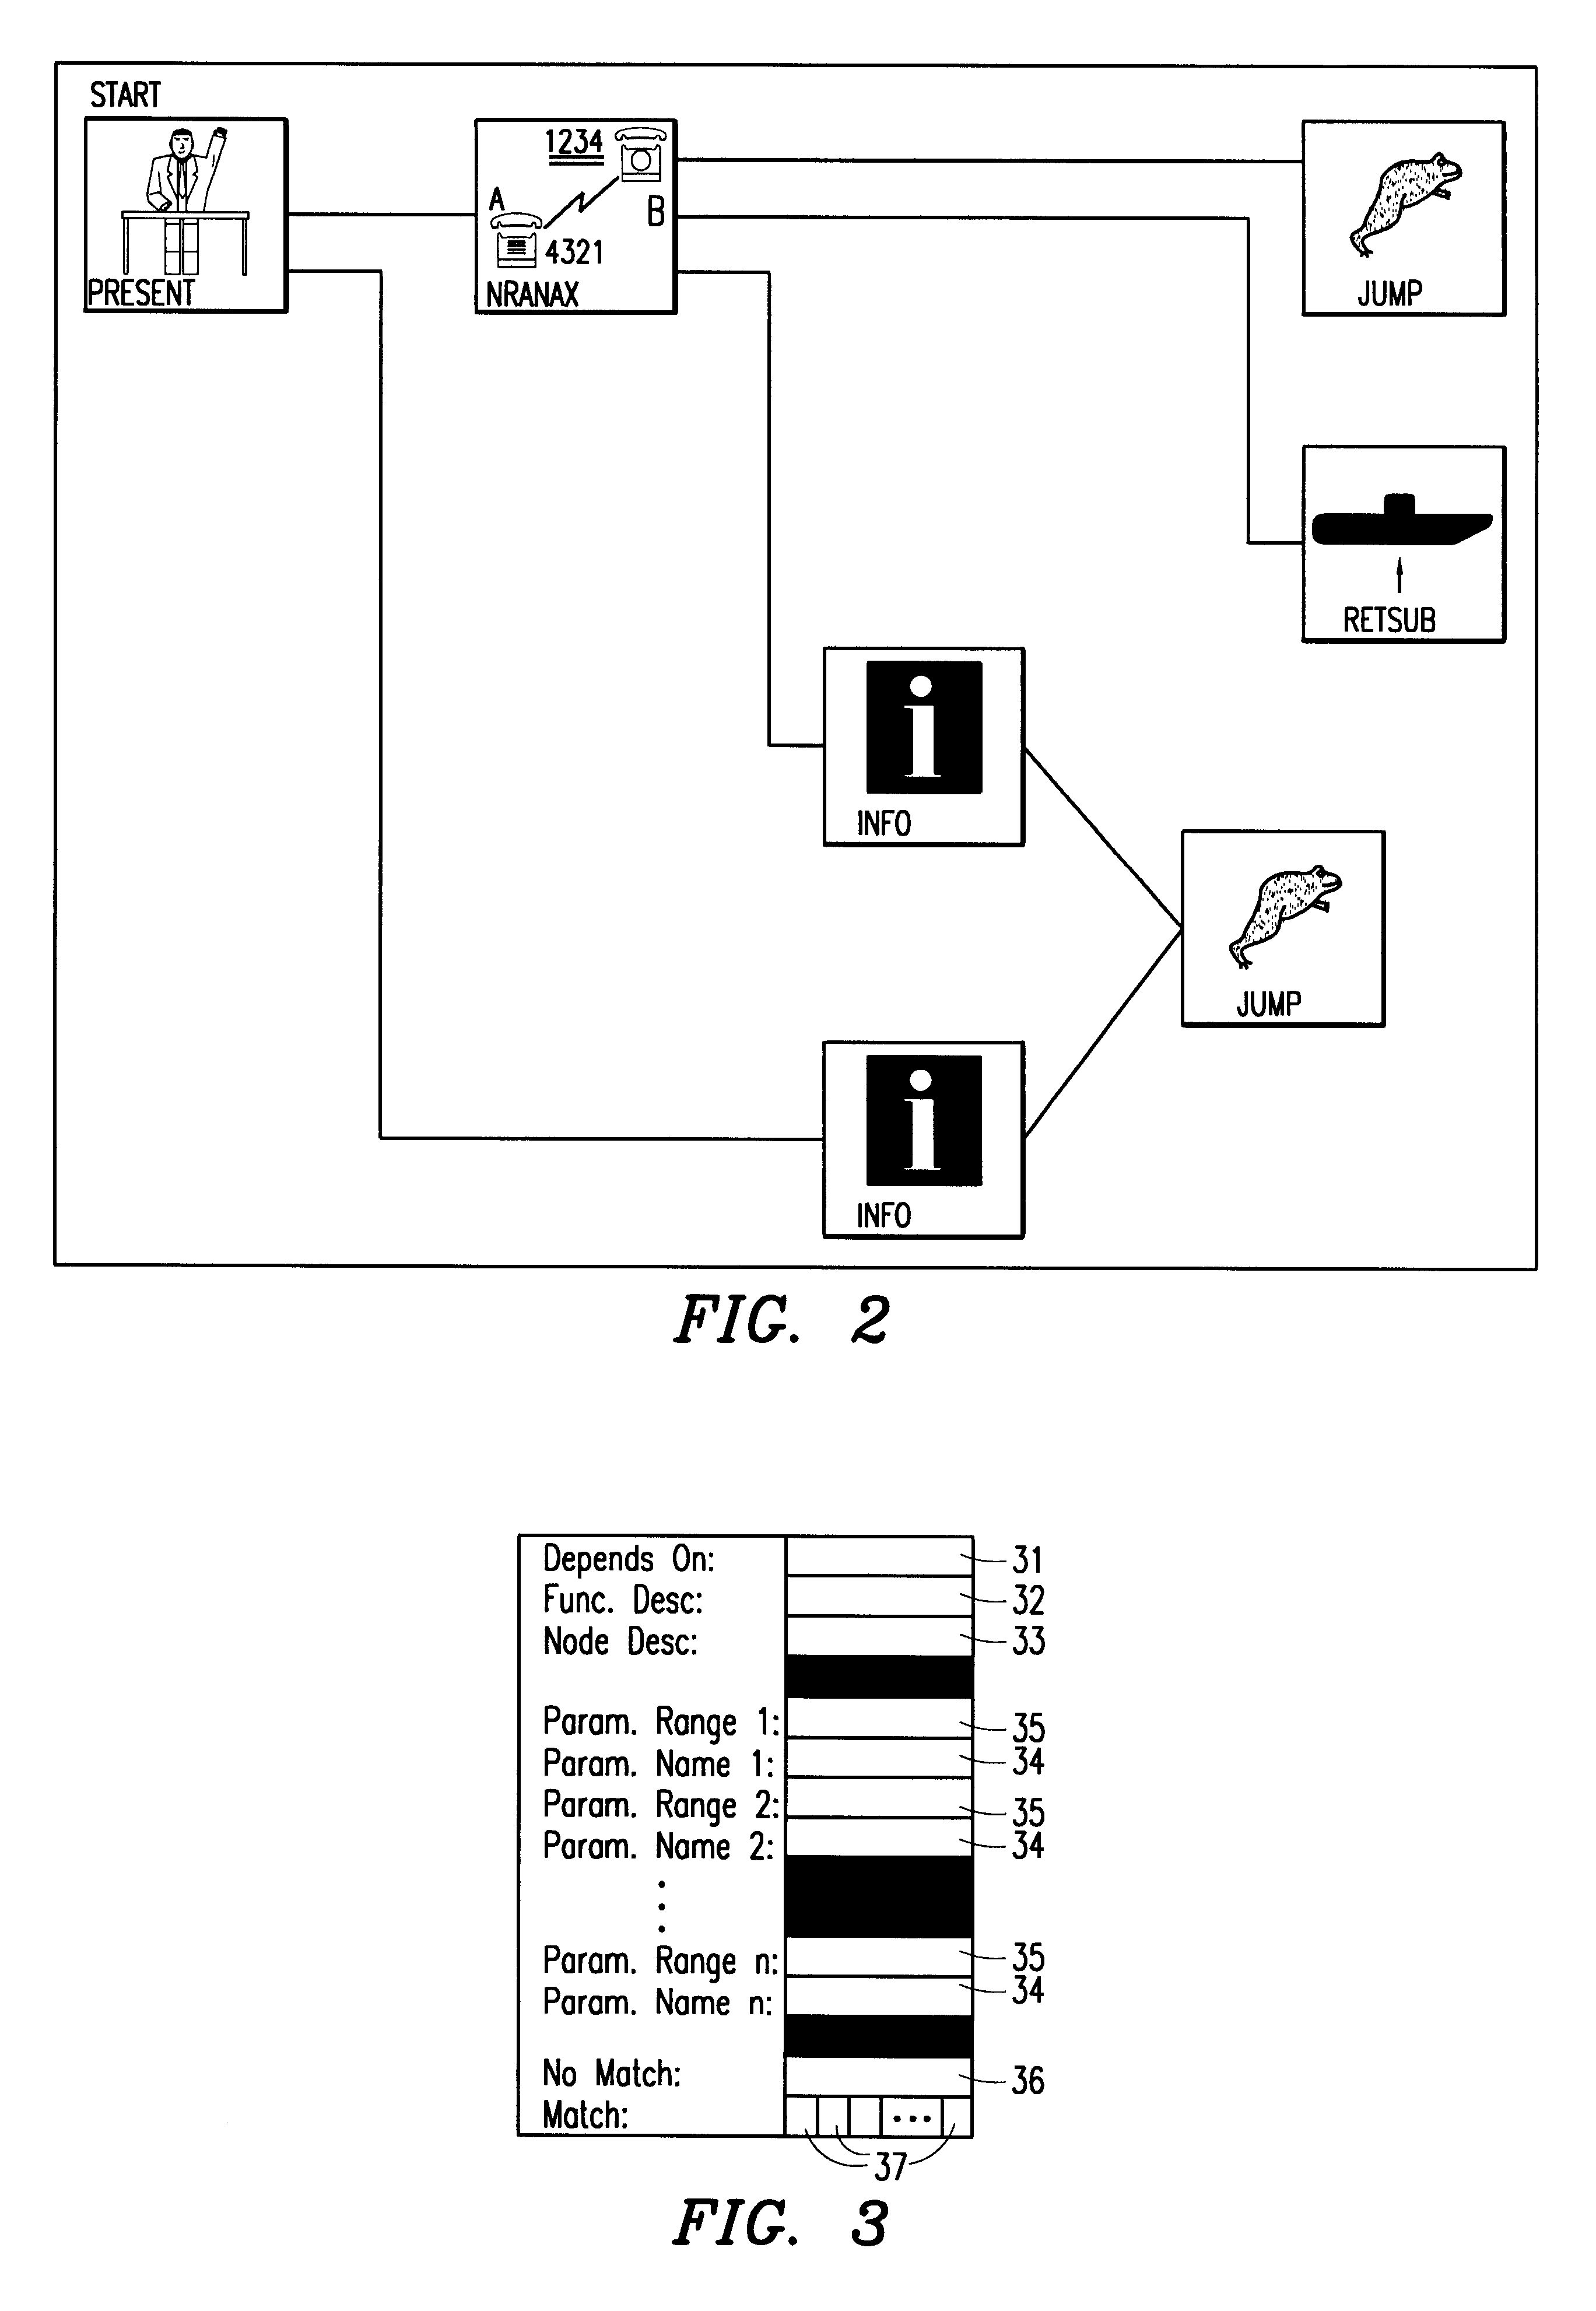 System and method for providing text descriptions to electronic databases